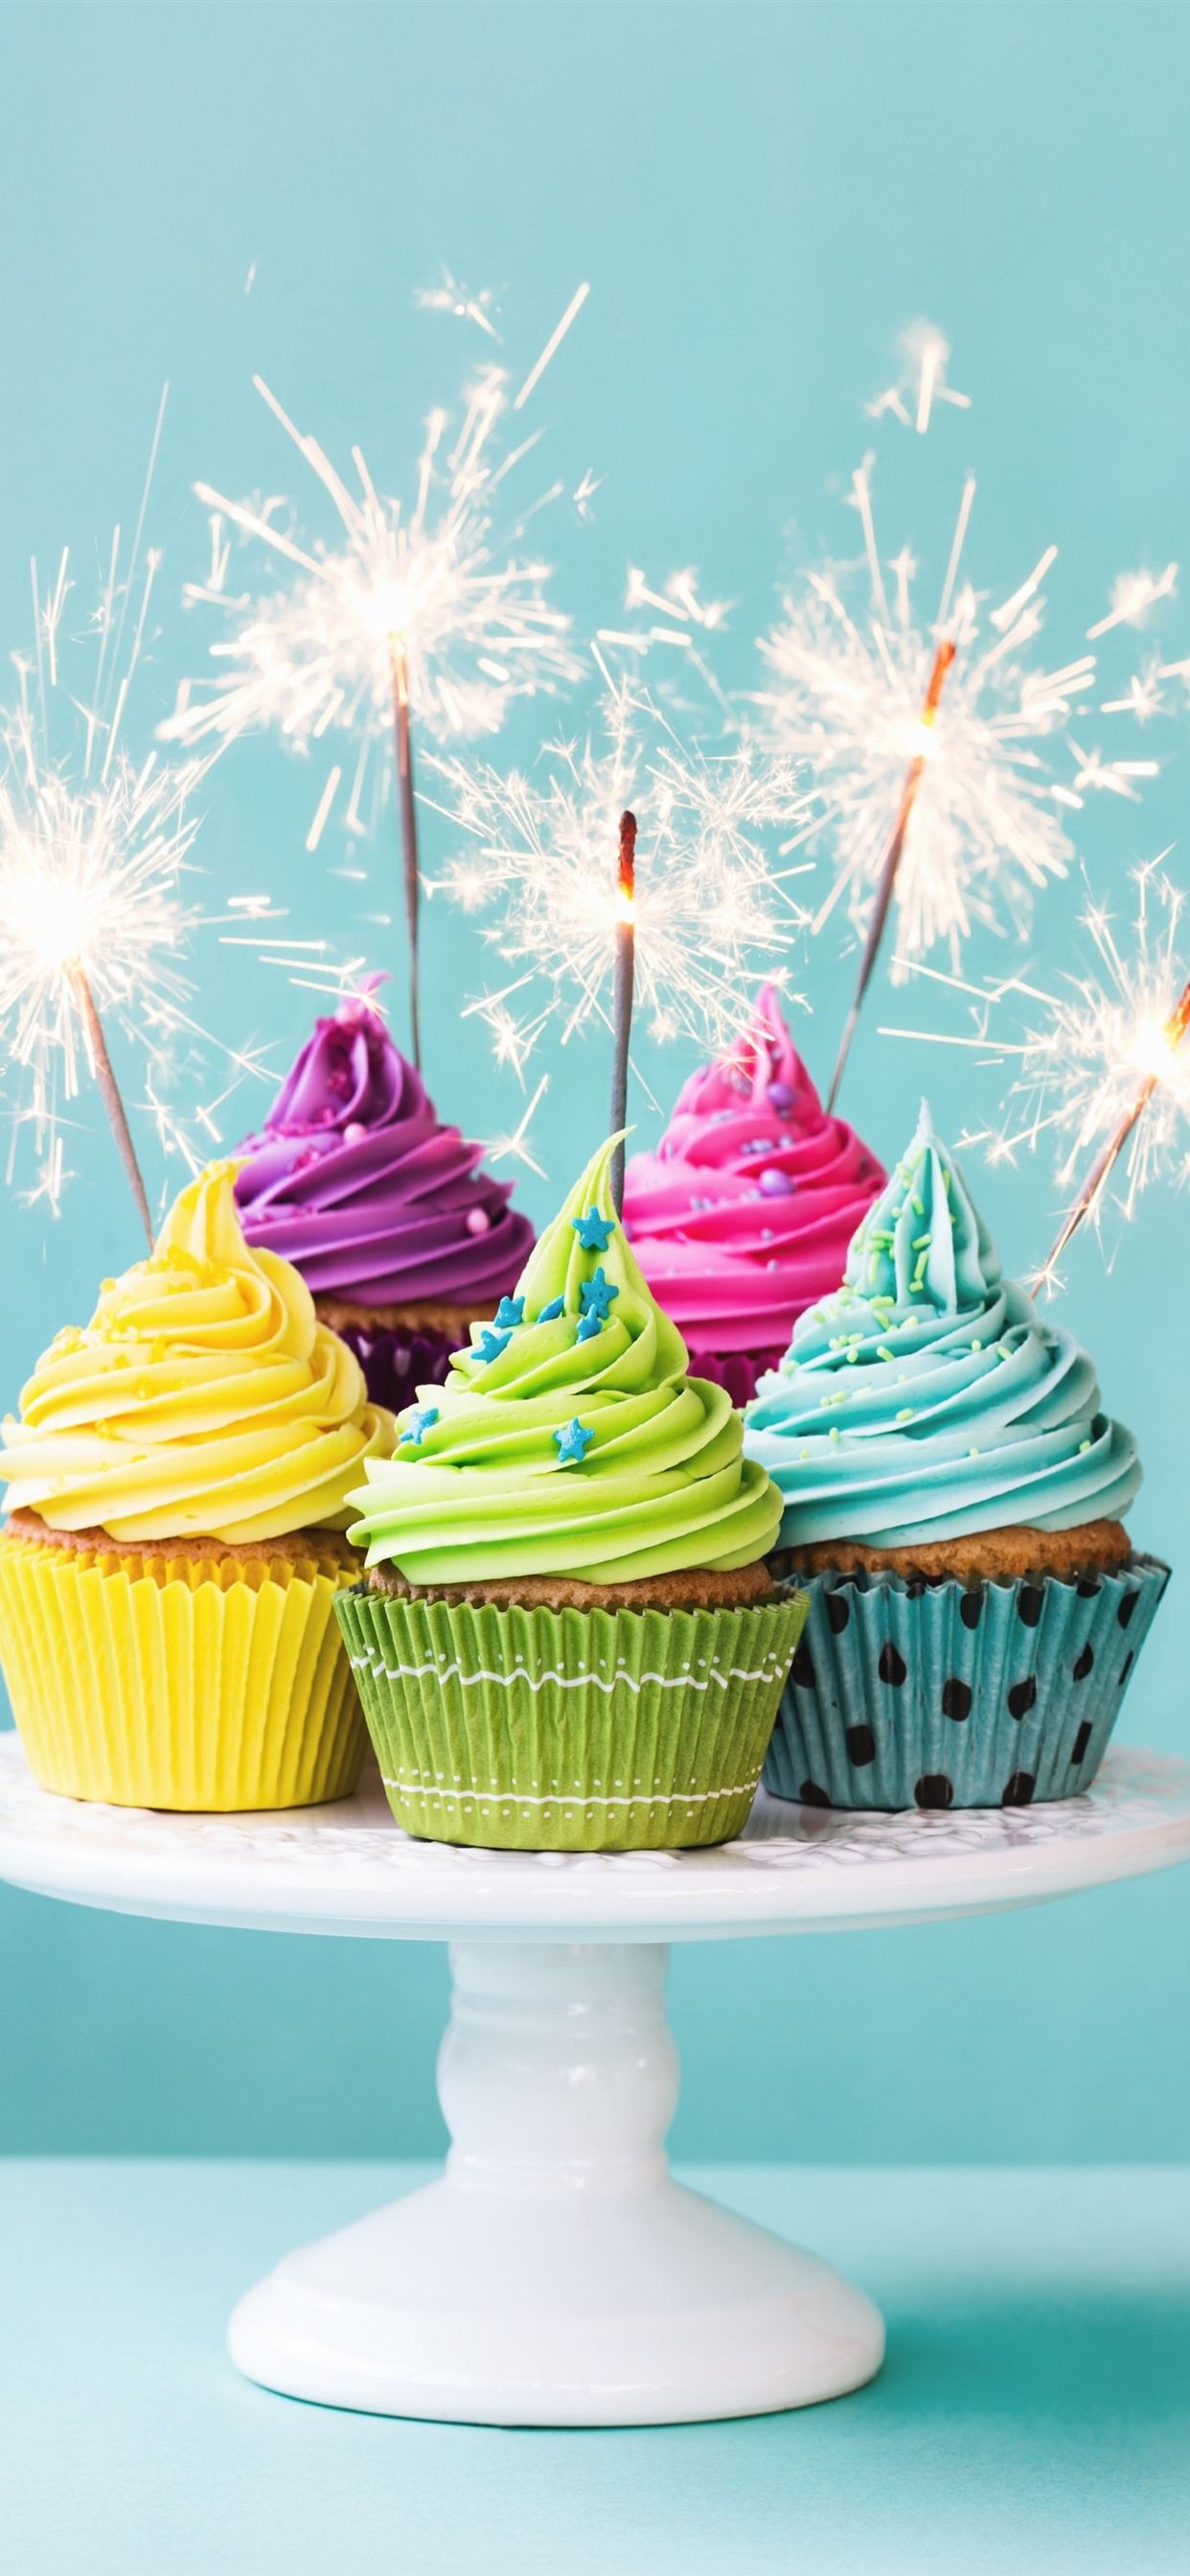 A plate of cupcakes with colorful icing and sparklers. - Cupcakes